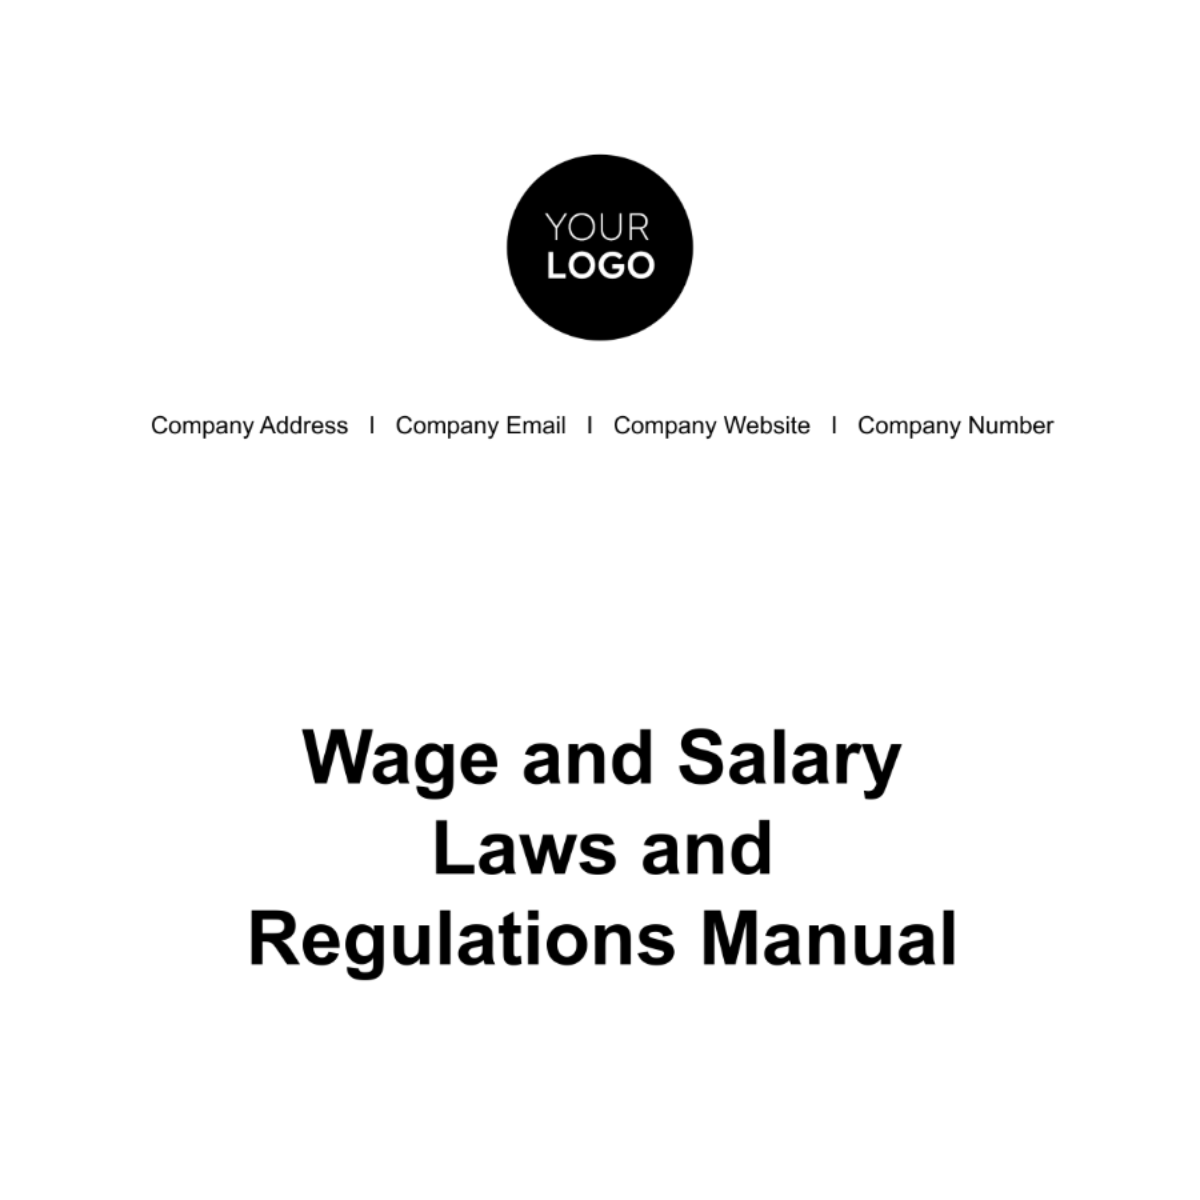 Wage and Salary Laws and Regulations Manual HR Template - Edit Online ...